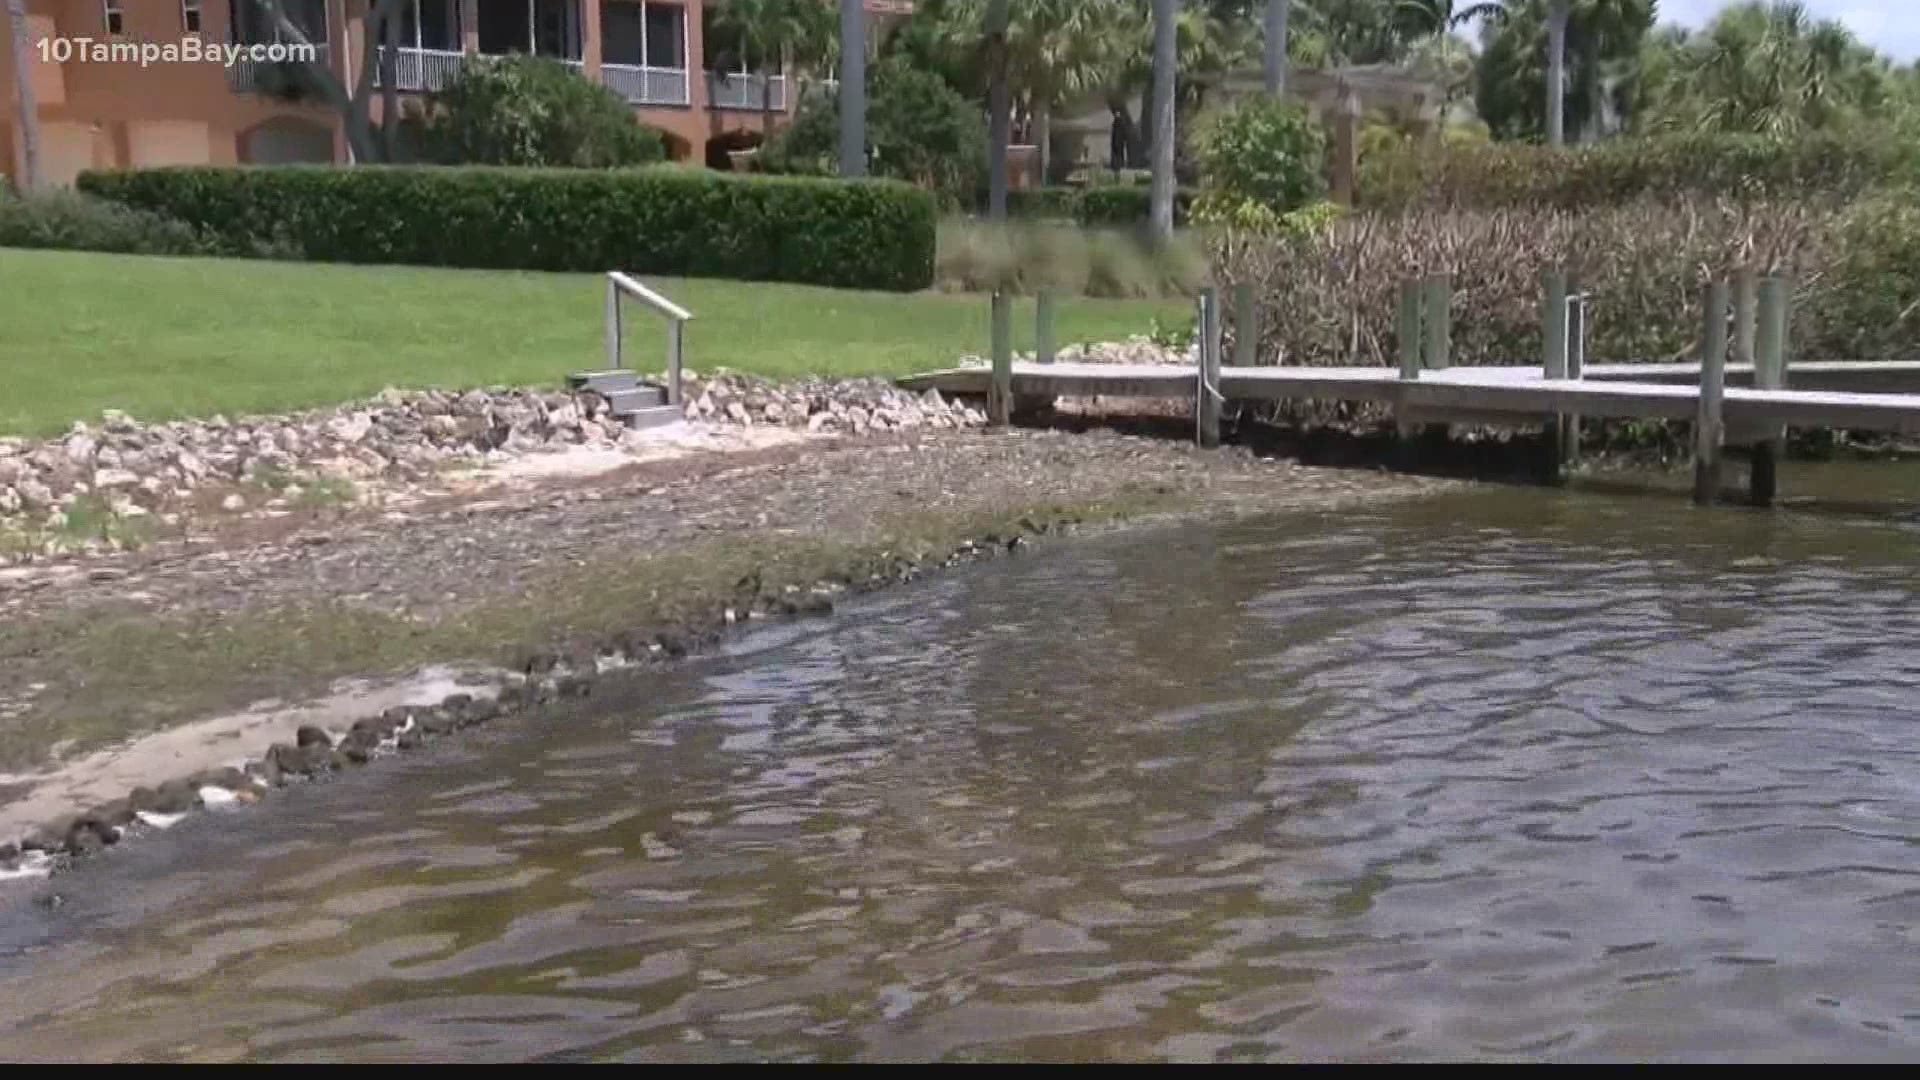 The Florida Department of Environmental Protection is fining the town and requiring both short and long term steps.